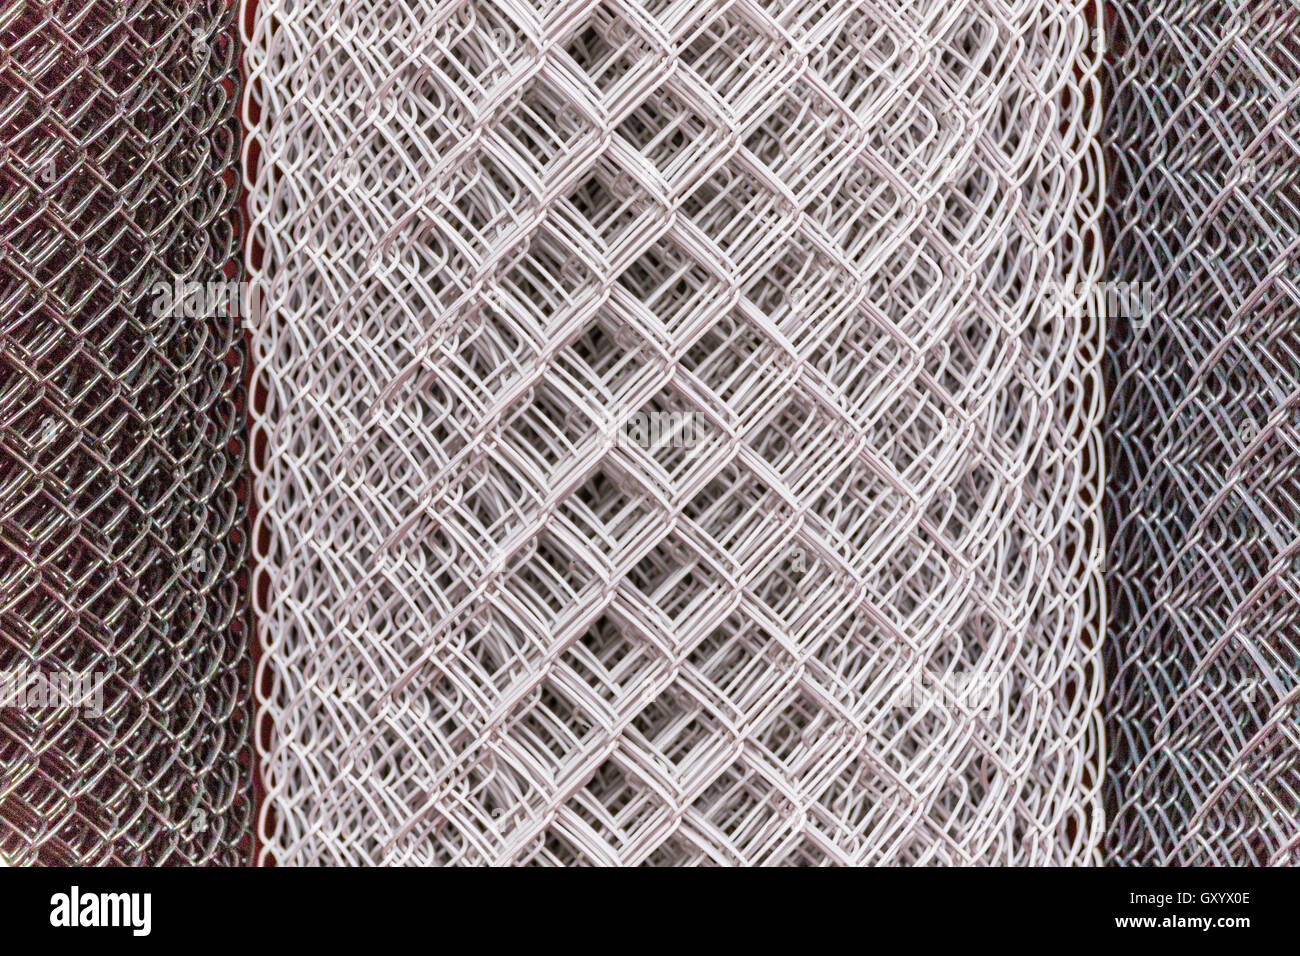 rolls of wire mesh Stock Photo